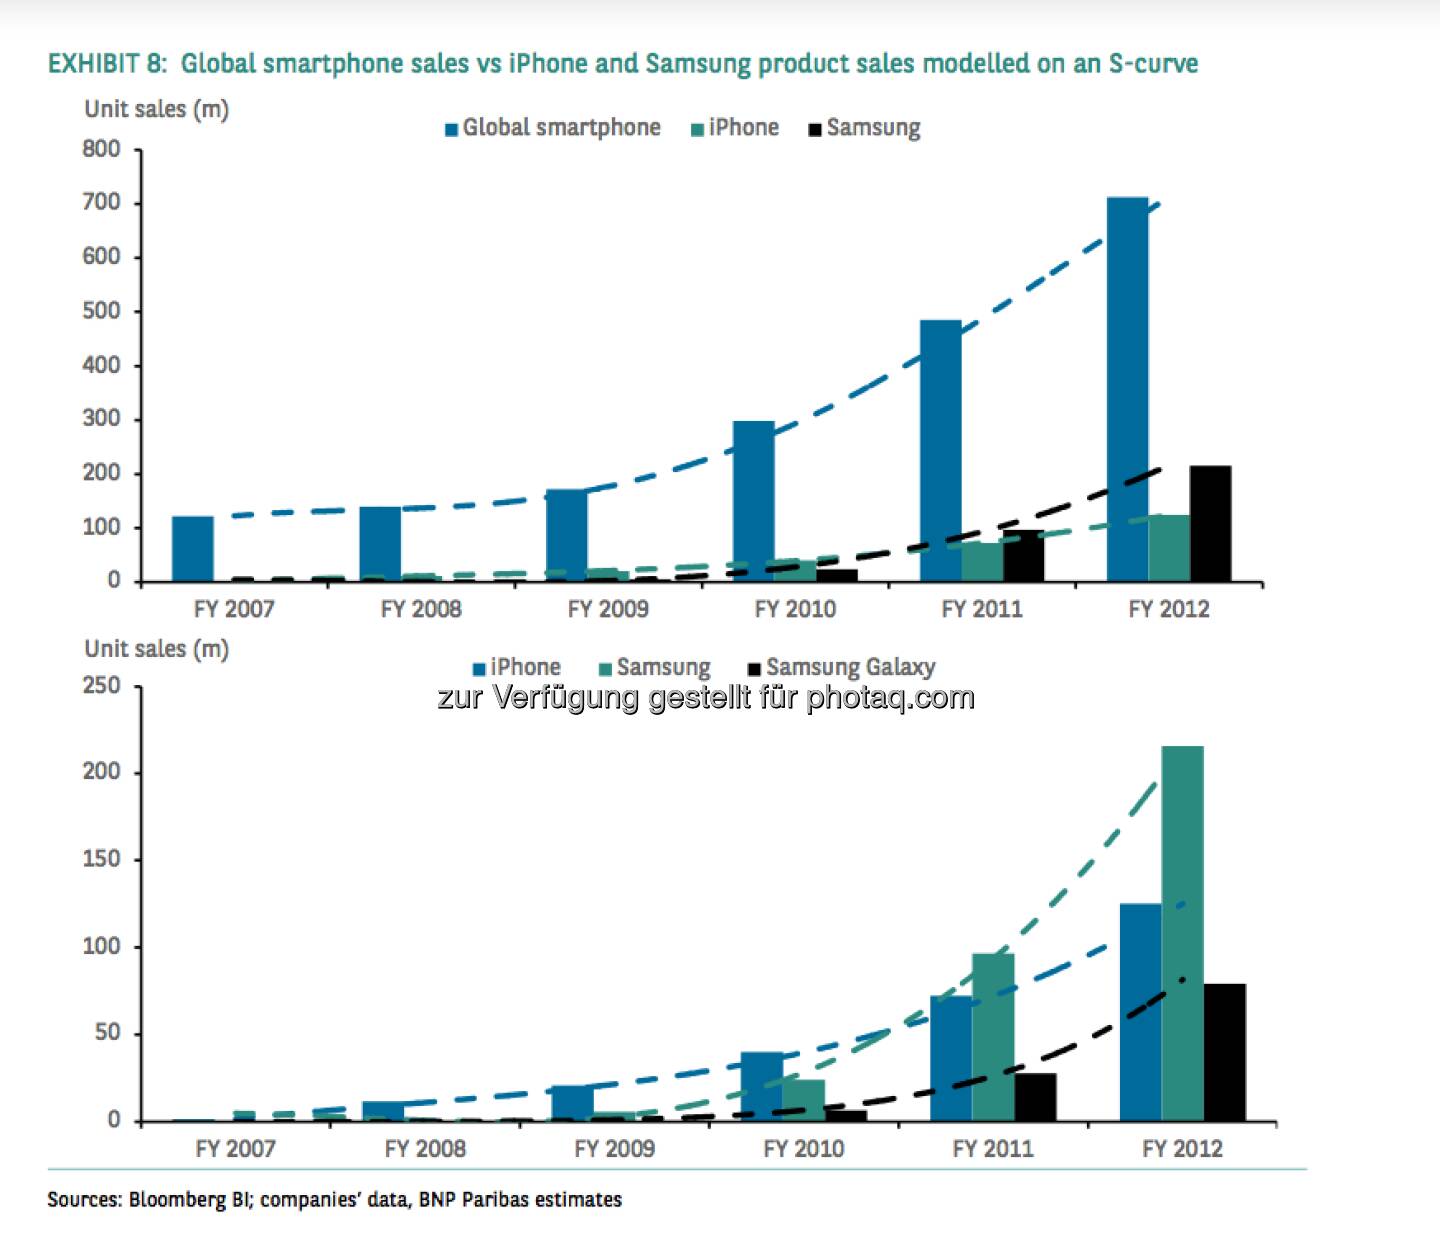 Global smartphone sales vs. iPhone and Samsung product sales modelled on an S-curve (Source) Bloomberg, BNP